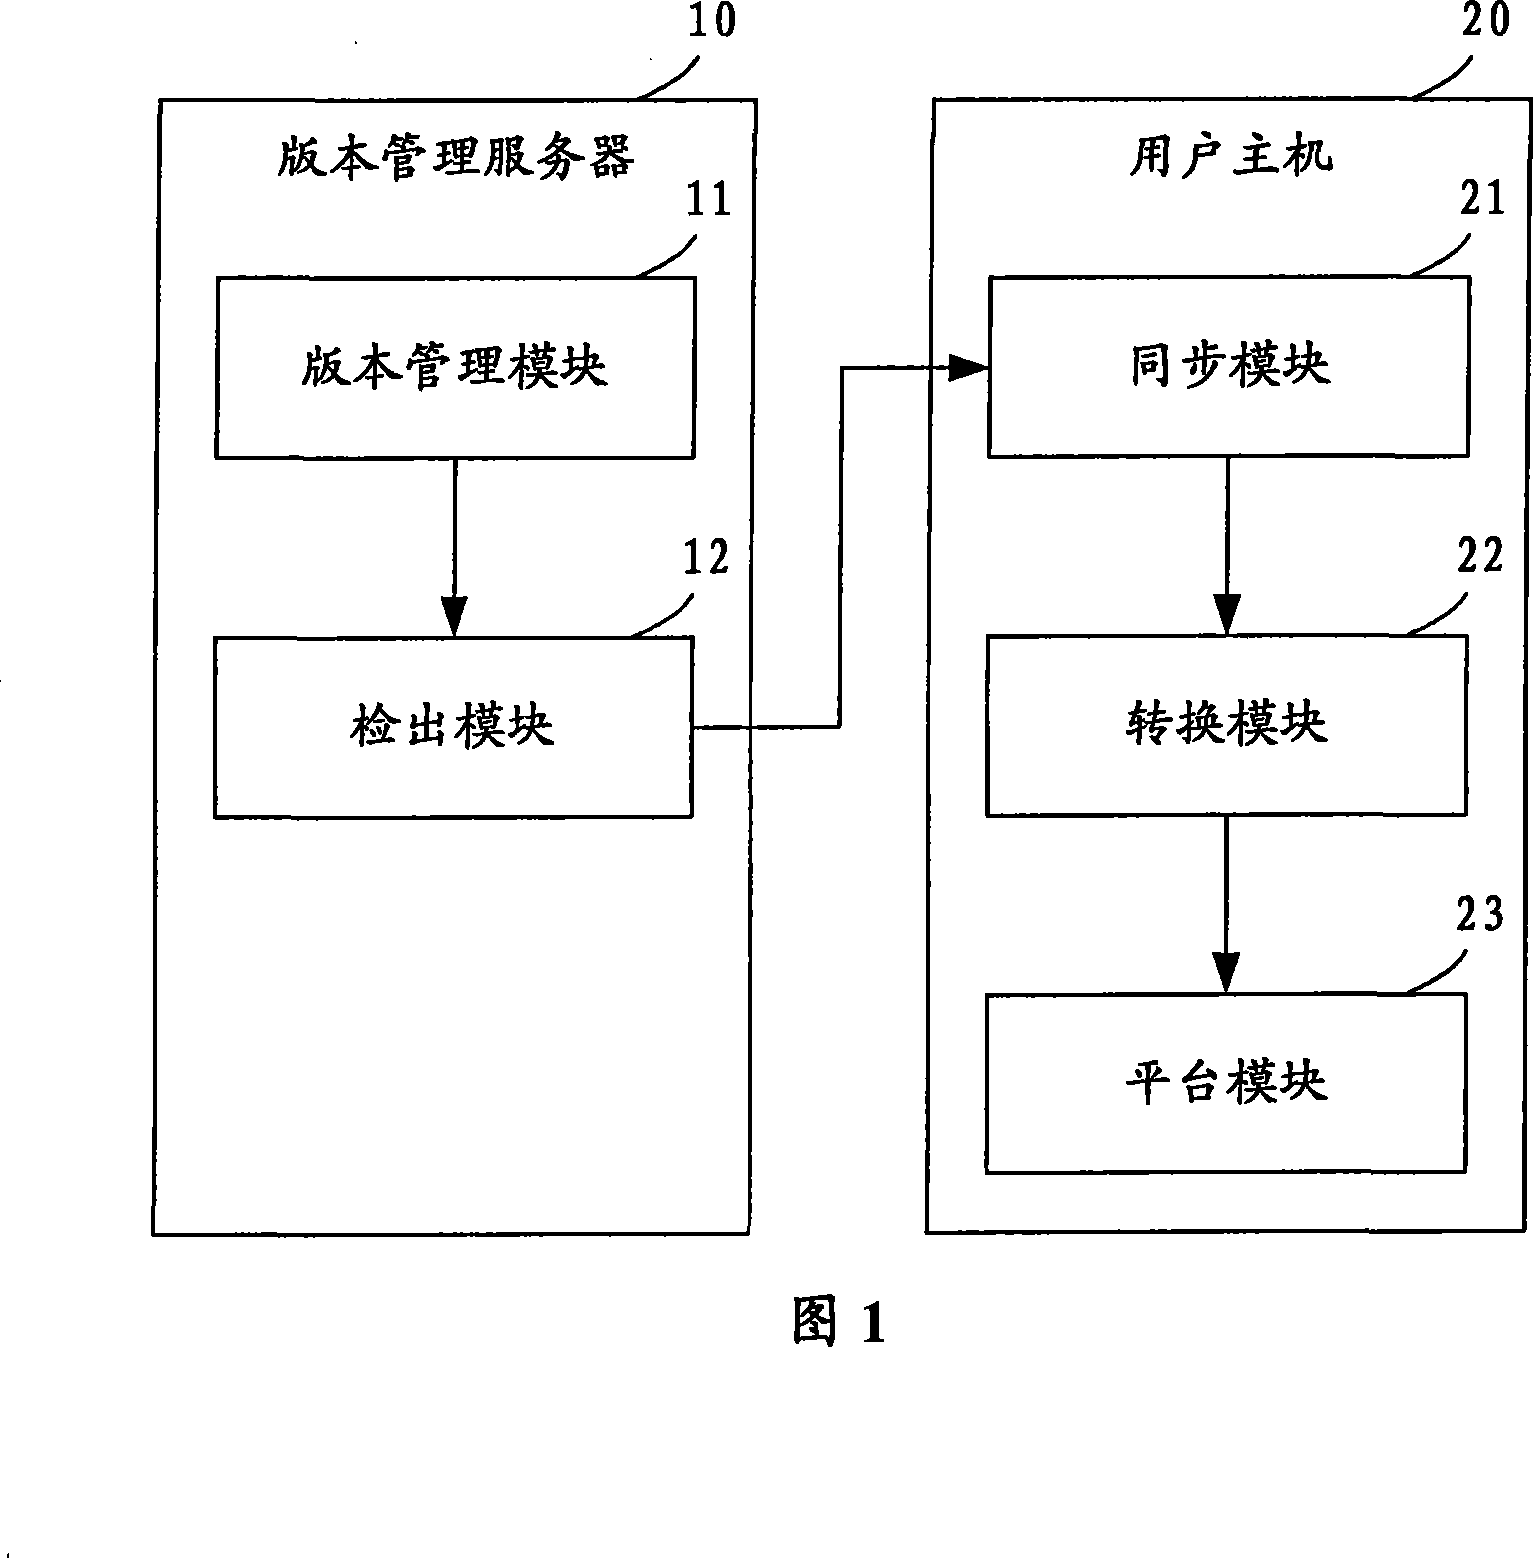 Method and device for implementing test script management and distribution